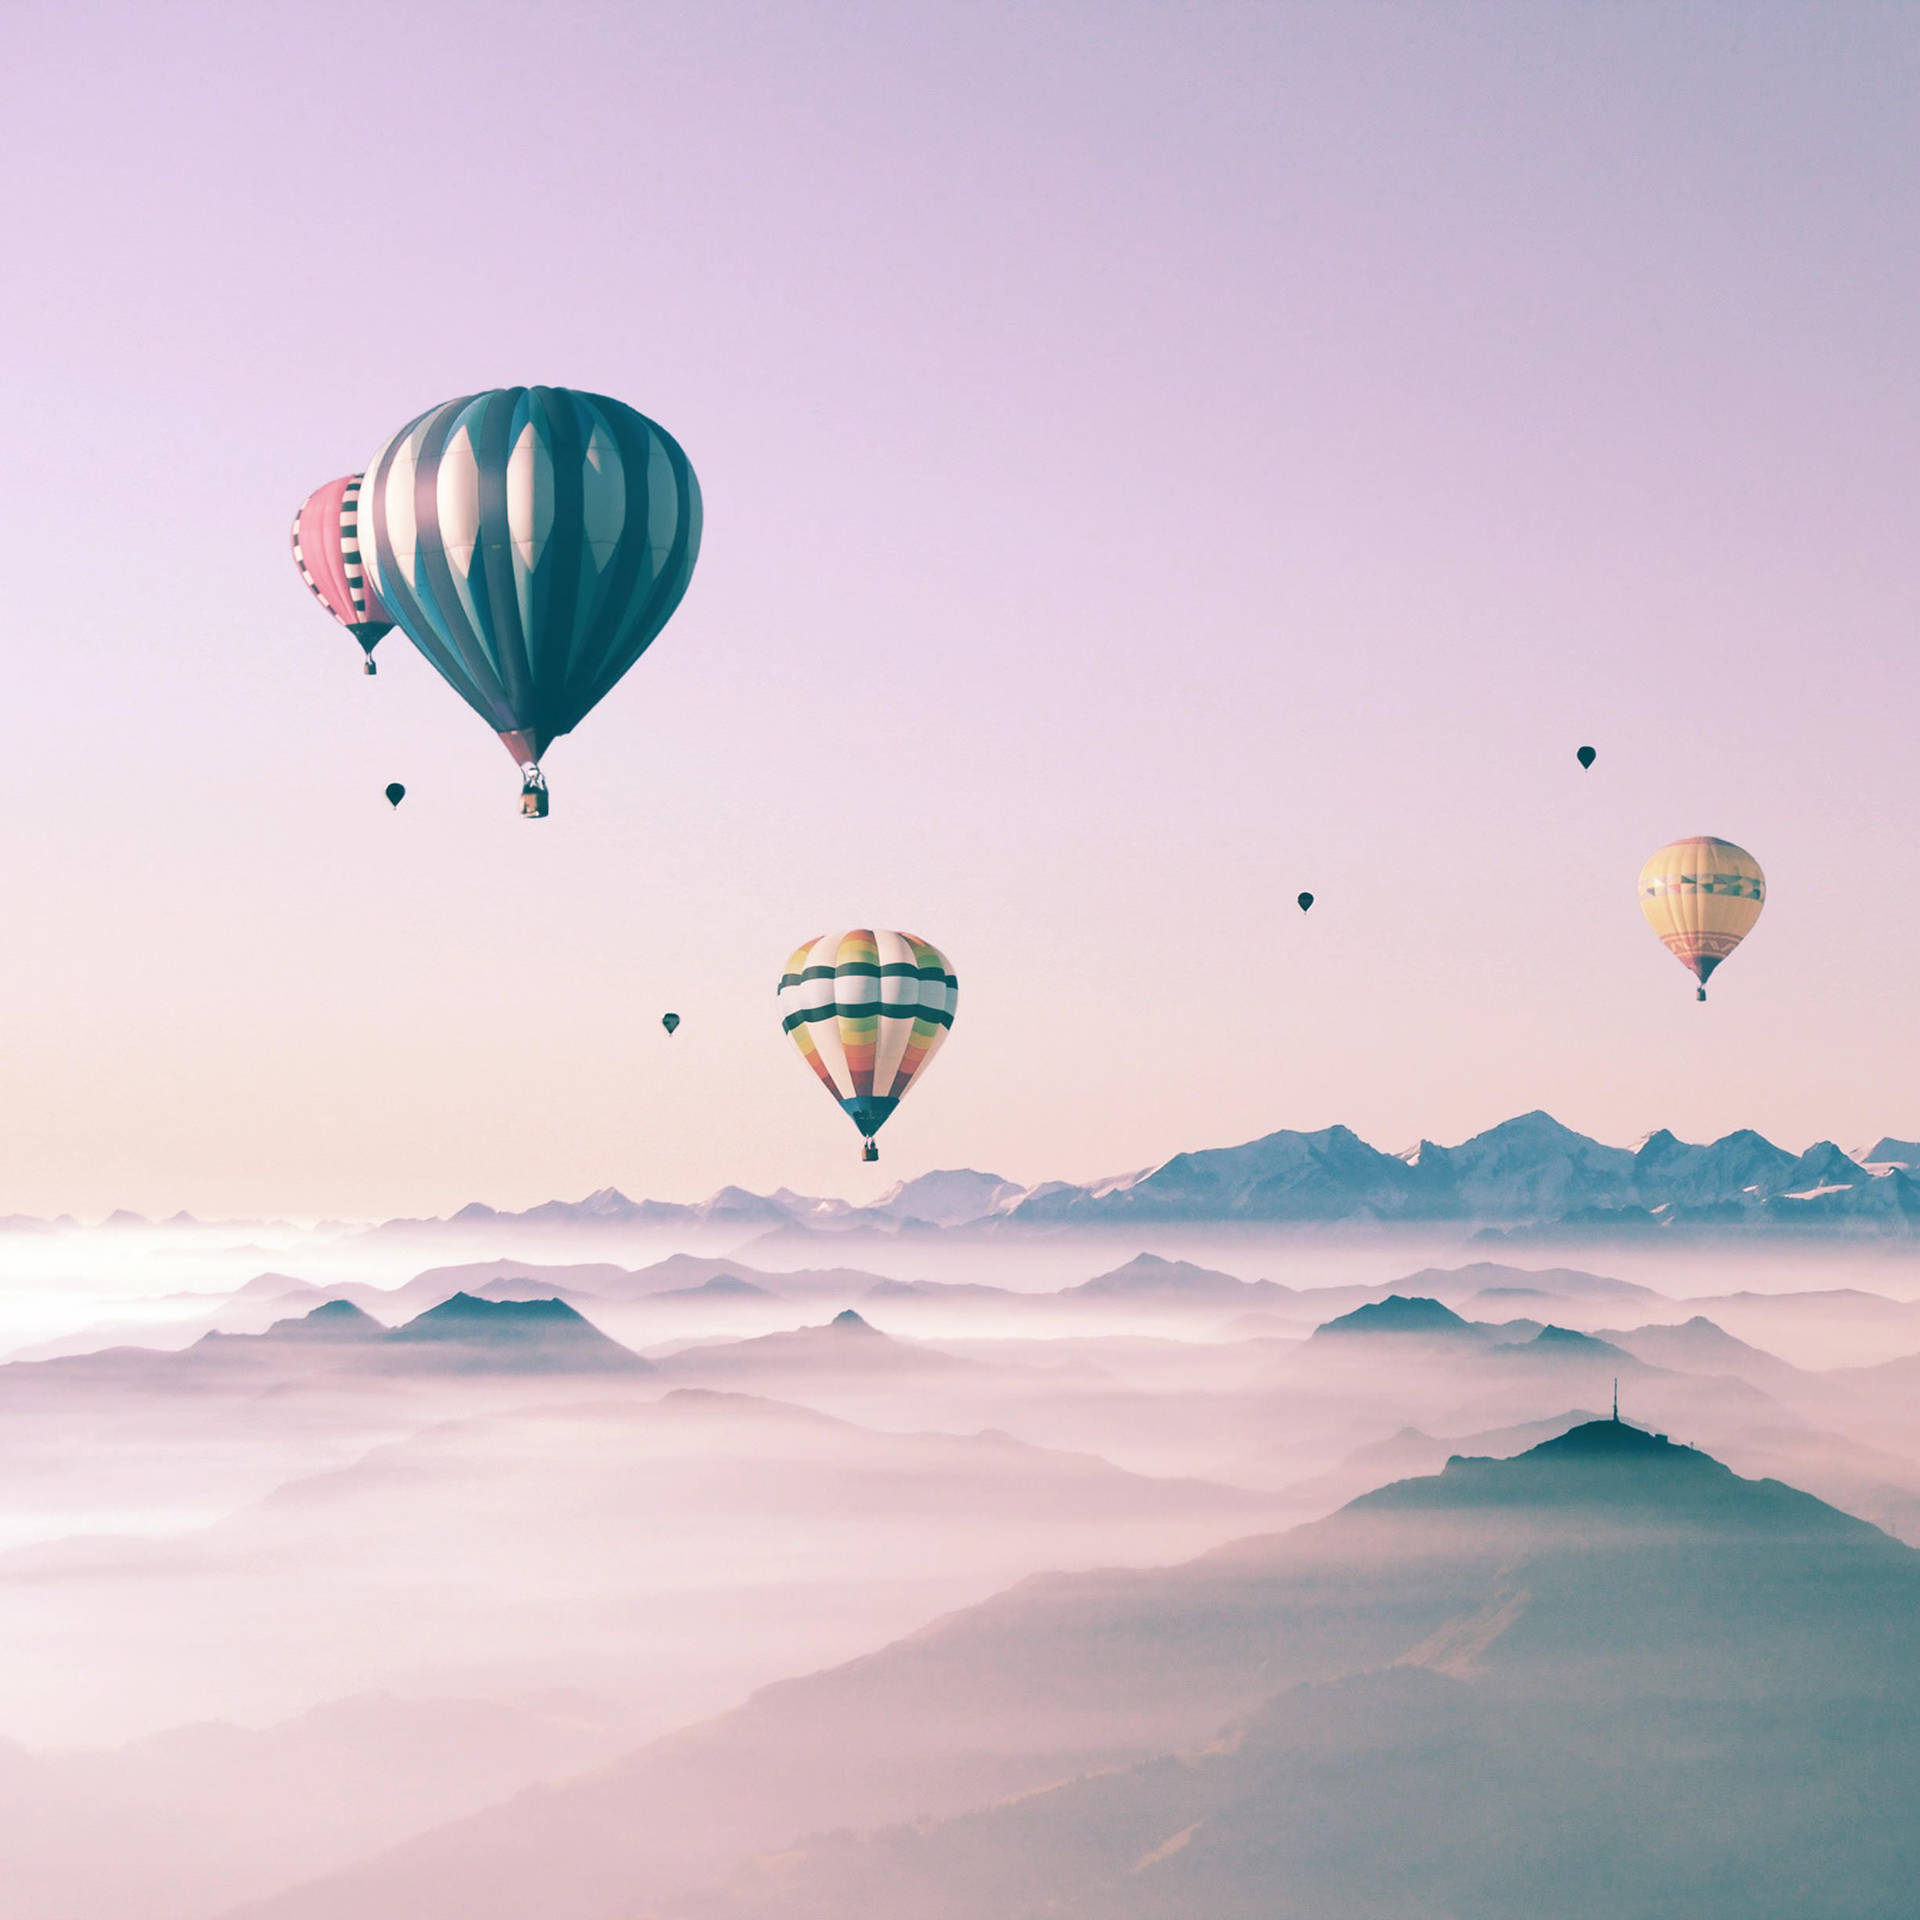 Colorful Hot Air Balloons Soaring In A Beautiful Sky Displayed On A Cute Ipad.